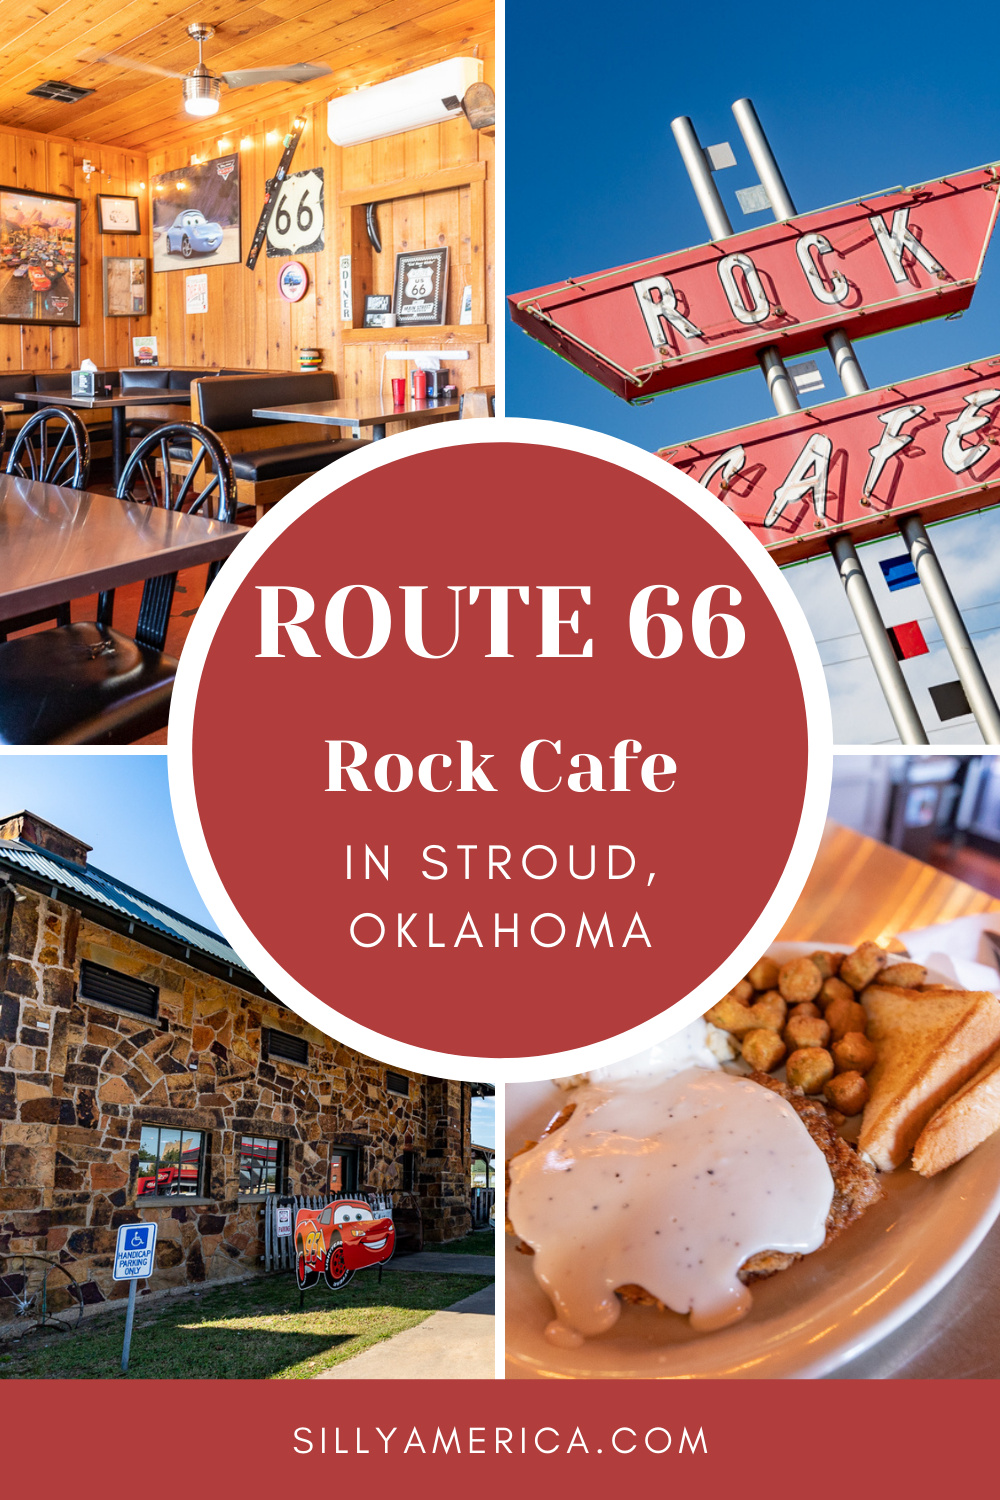 This Route 66 restaurant ROCKS. And it has been rocking since 1939. The Rock Cafe in Stroud, Oklahoma is a nostalgic road trip stop, with delicious food that you can't miss.  #RoadTrips #RoadTripStop #Route66 #Route66RoadTrip #OklahomaRoute66 #Oklahoma #OklahomaRoadTrip #OklahomaRoadsideAttractions #RoadsideAttractions #RoadsideAttraction #RoadsideAmerica #RoadTrip